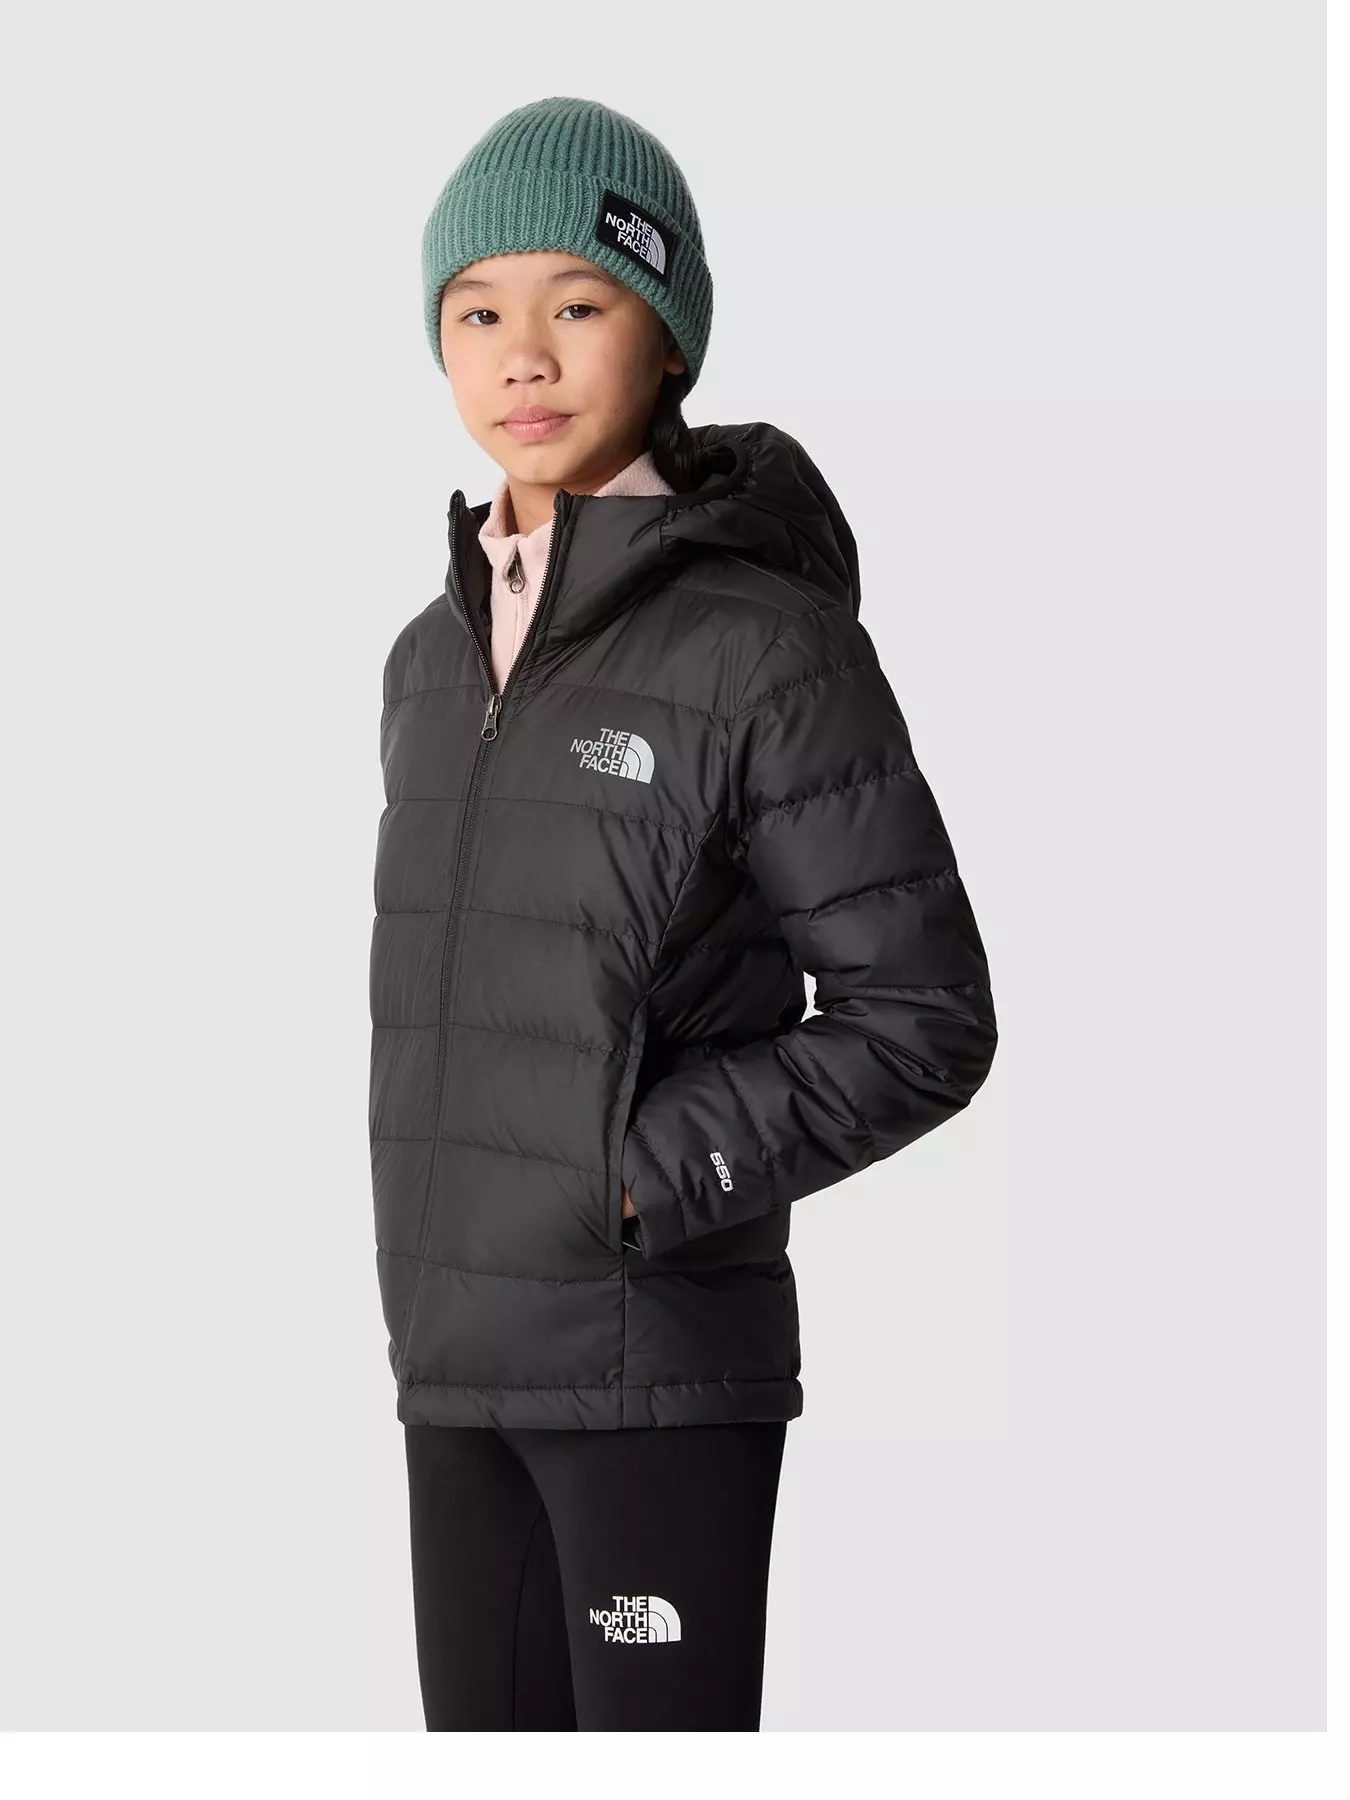 The north face, Sportswear, Child & baby